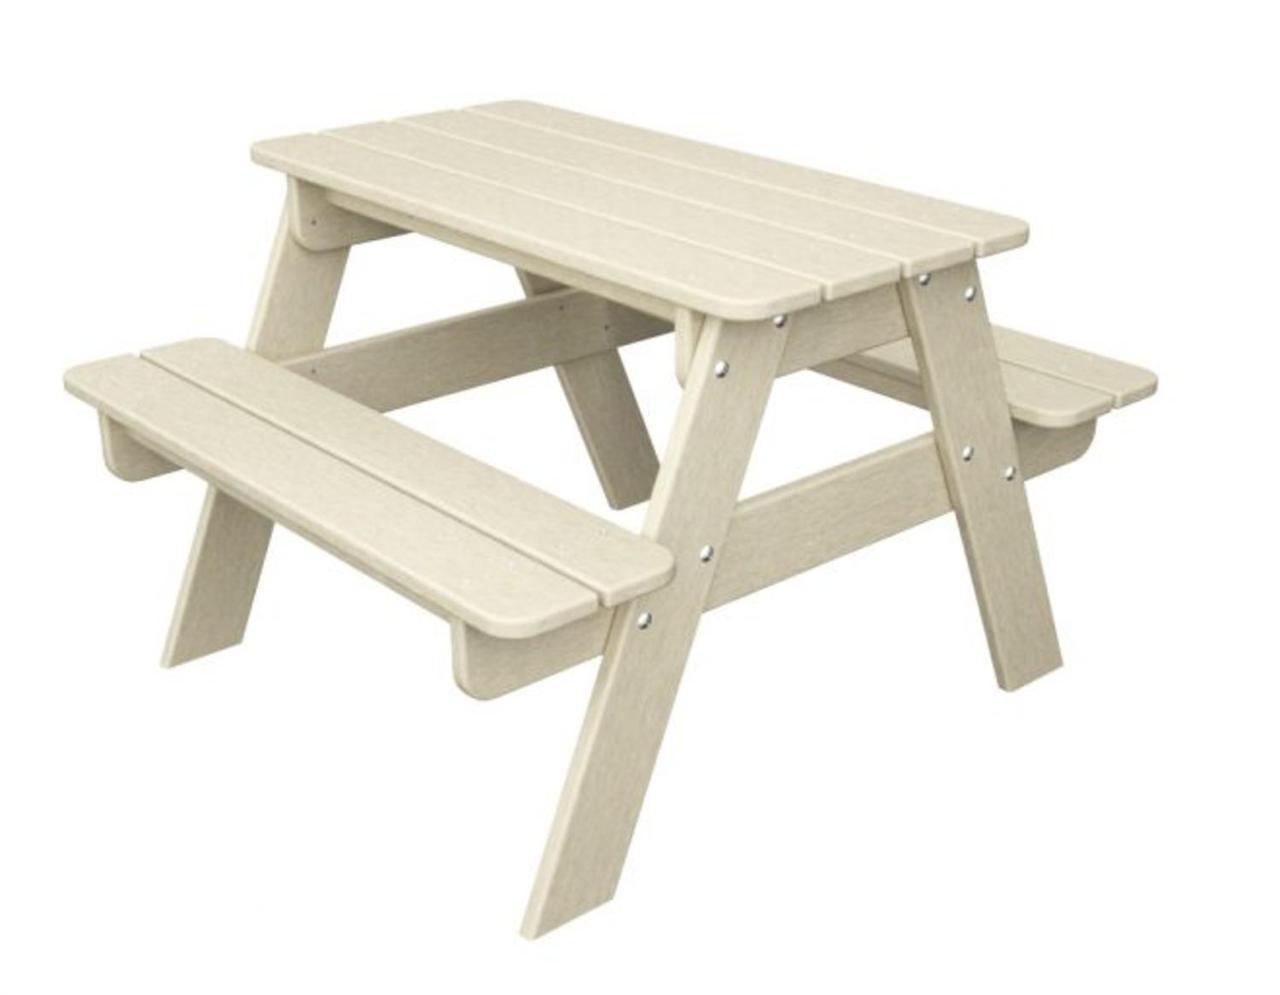 Khaki Recycled Earth-Friendly Outdoor Patio Kid's Picnic Table